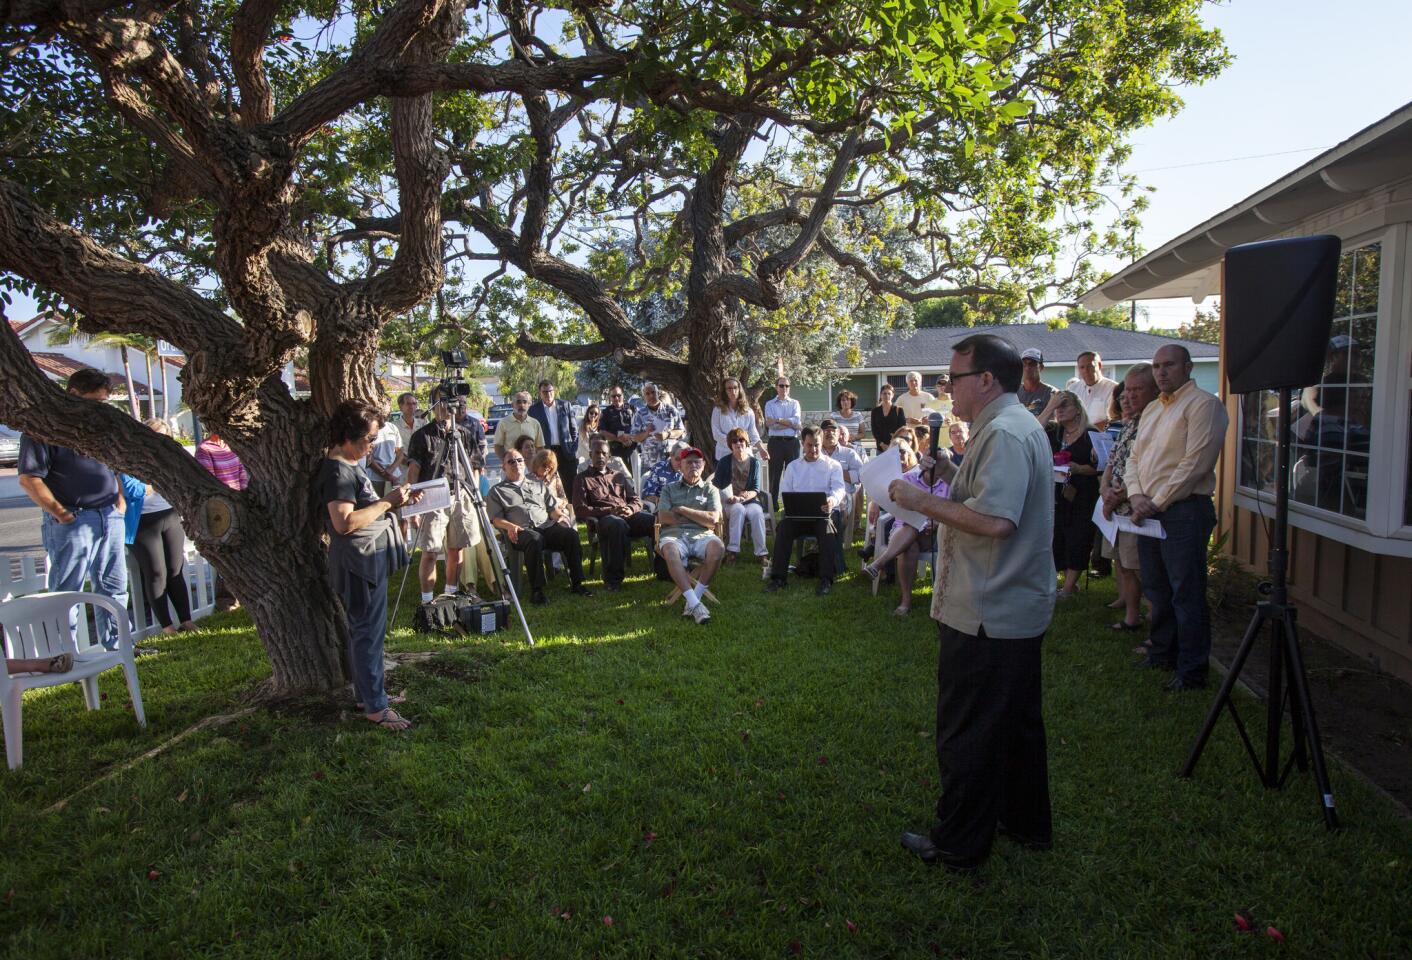 Costa Mesa Mayor Jim Righeimer talks to homeowners and members of the community at Carrie Renfro's Eastside home on Thursday about the issue of rehabilitation homes in Costa Mesa.